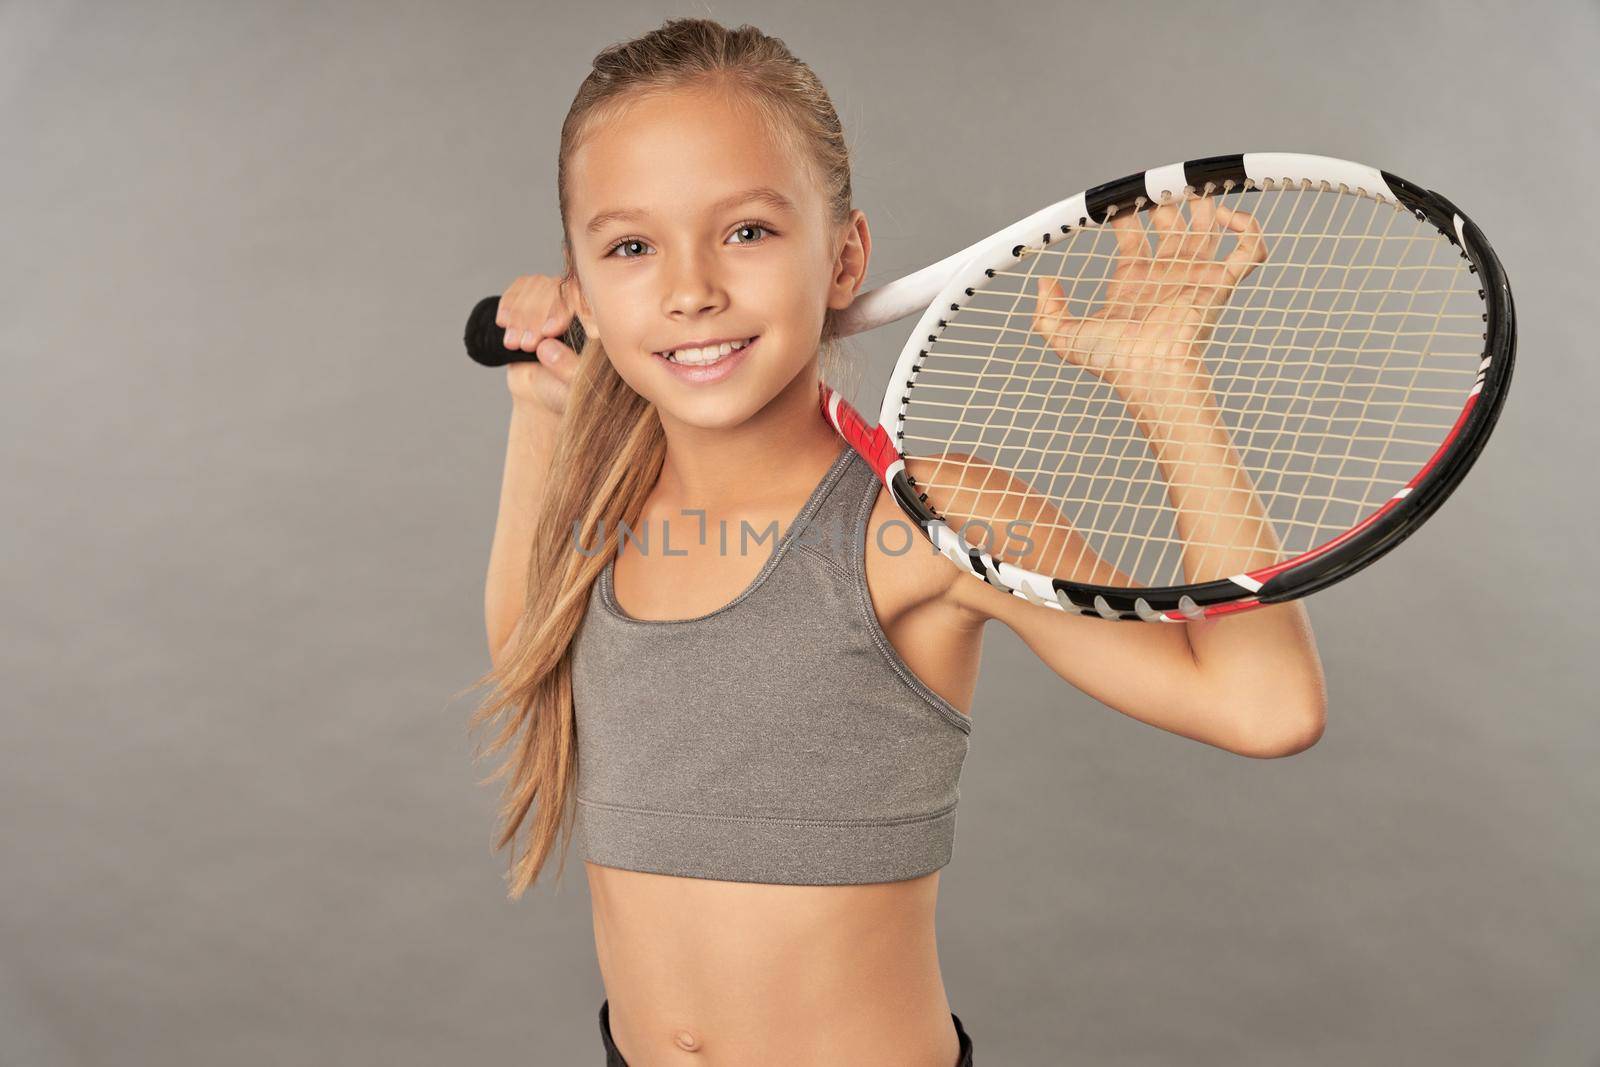 Cheerful female child tennis player looking at camera and smiling while holding racket behind her back